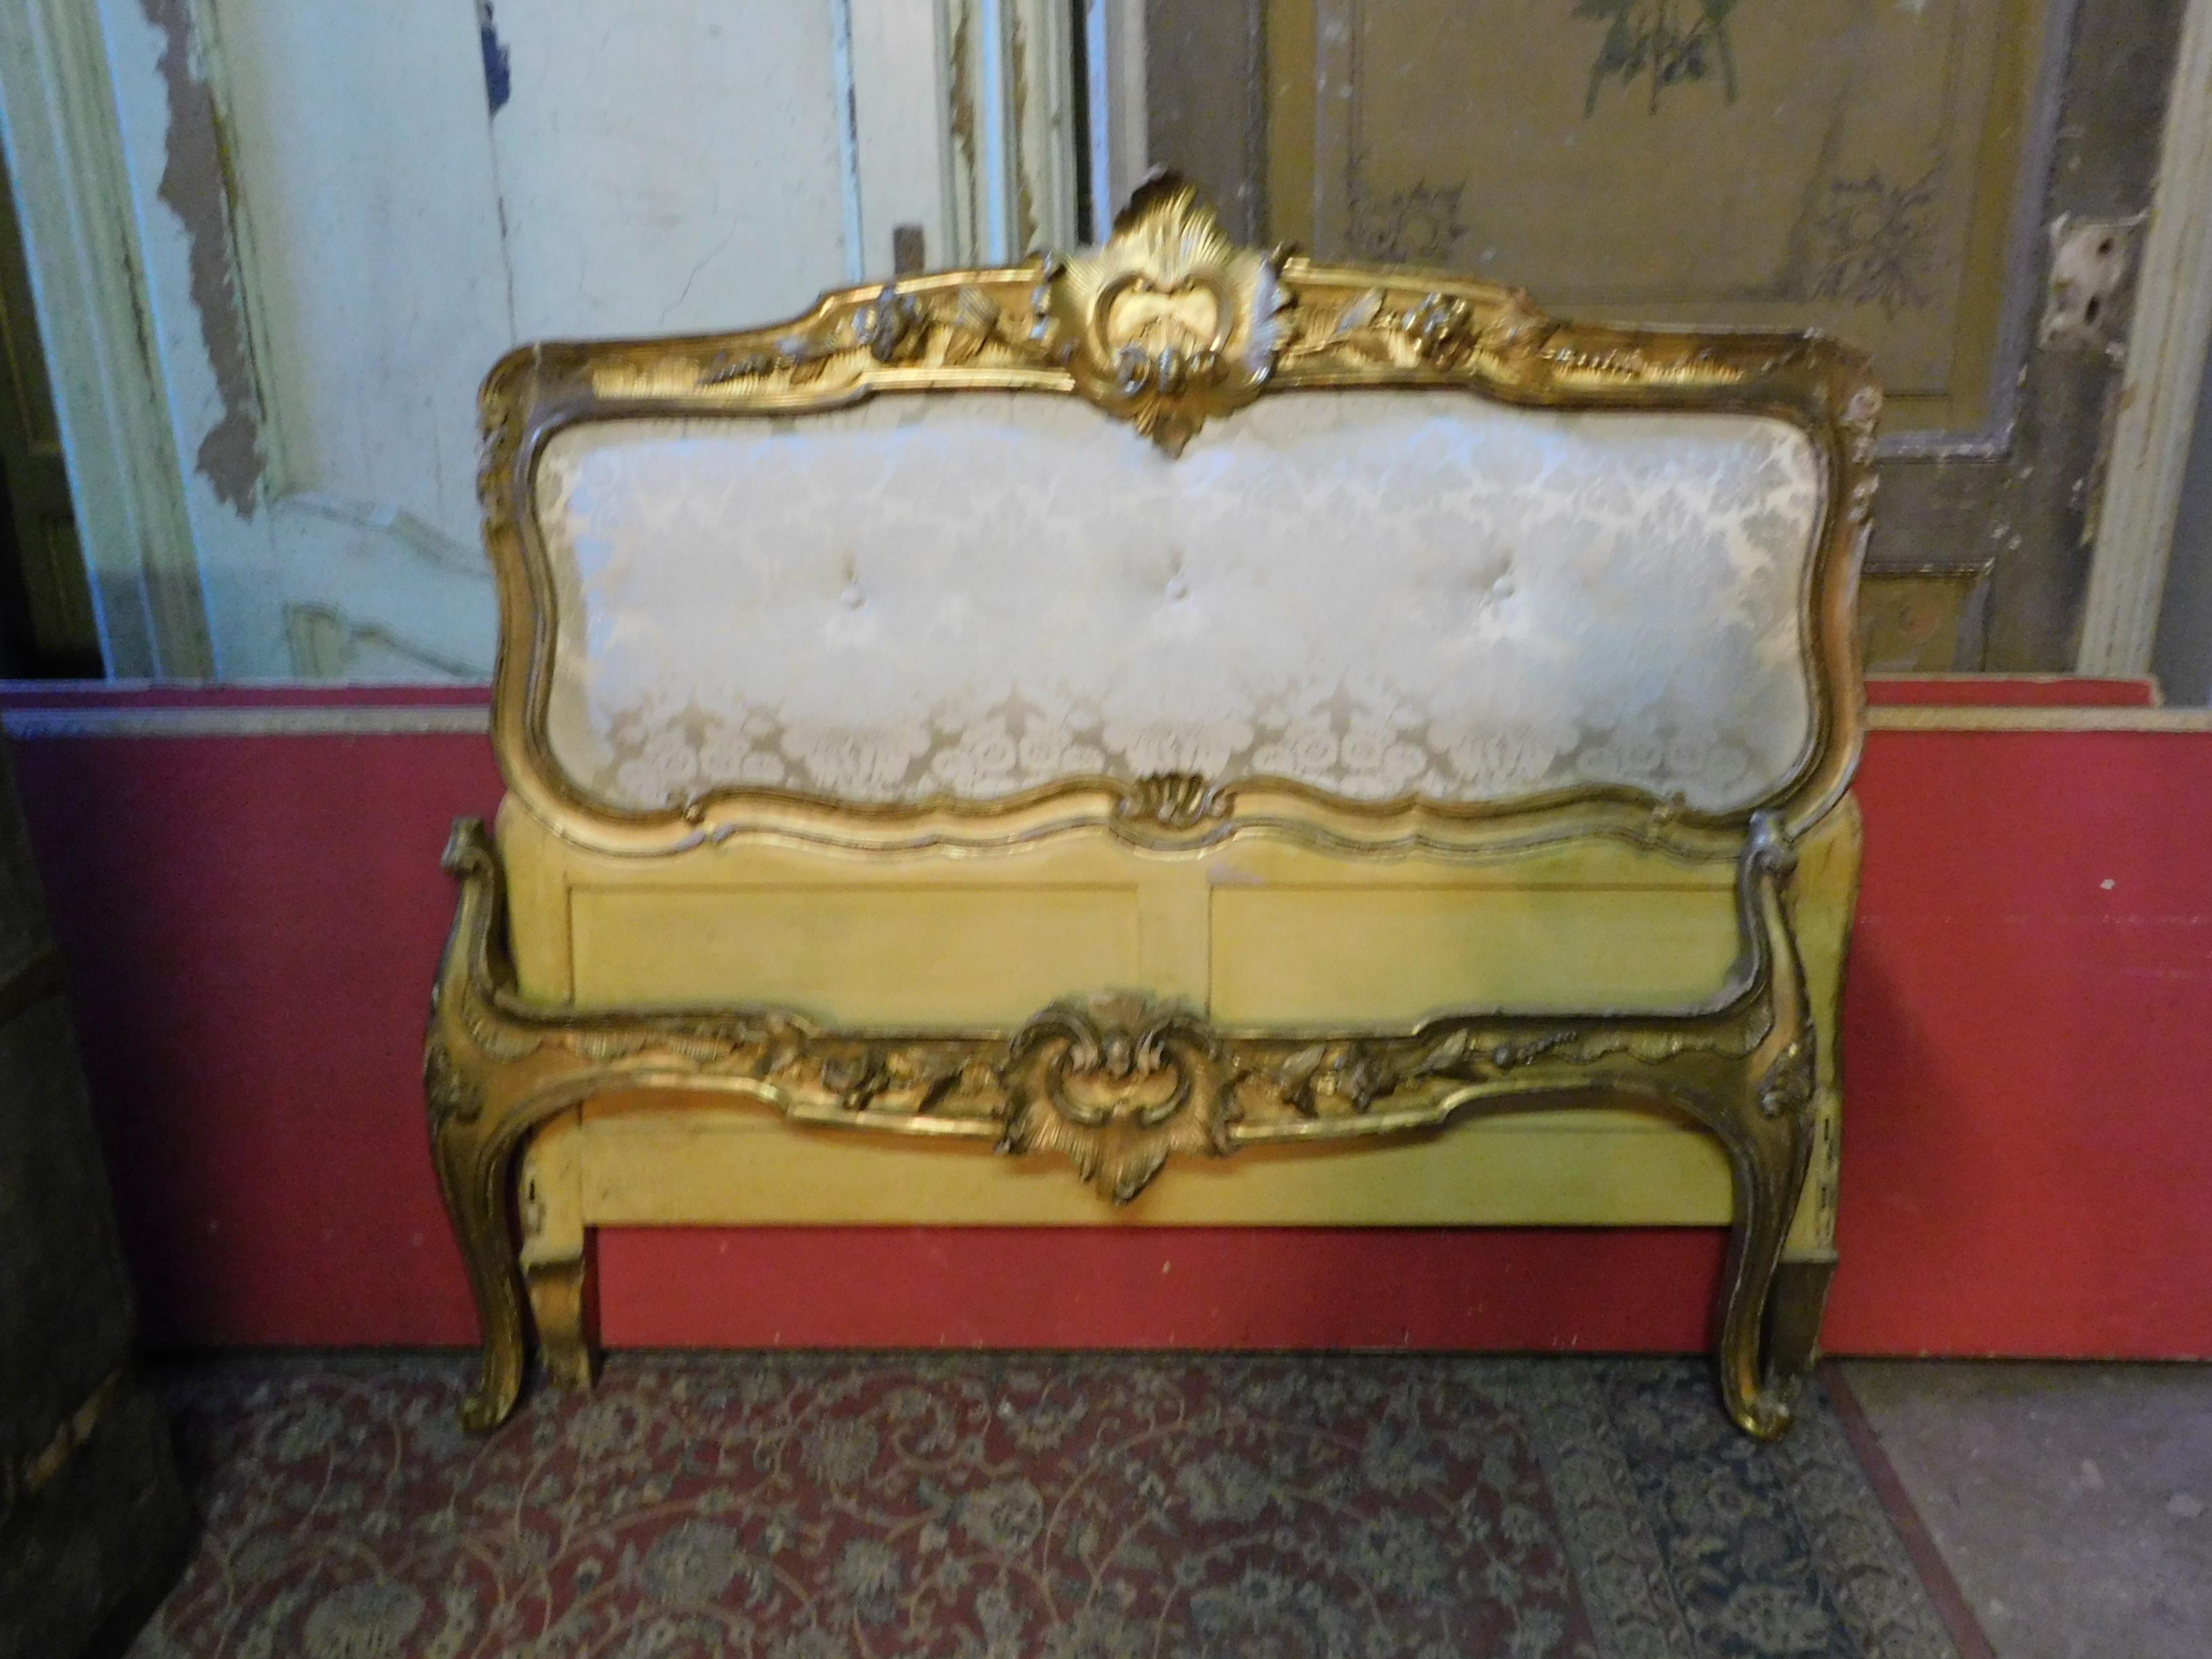 19th century antique golden bed with damask lined headboard, complete with sides, from Naples.